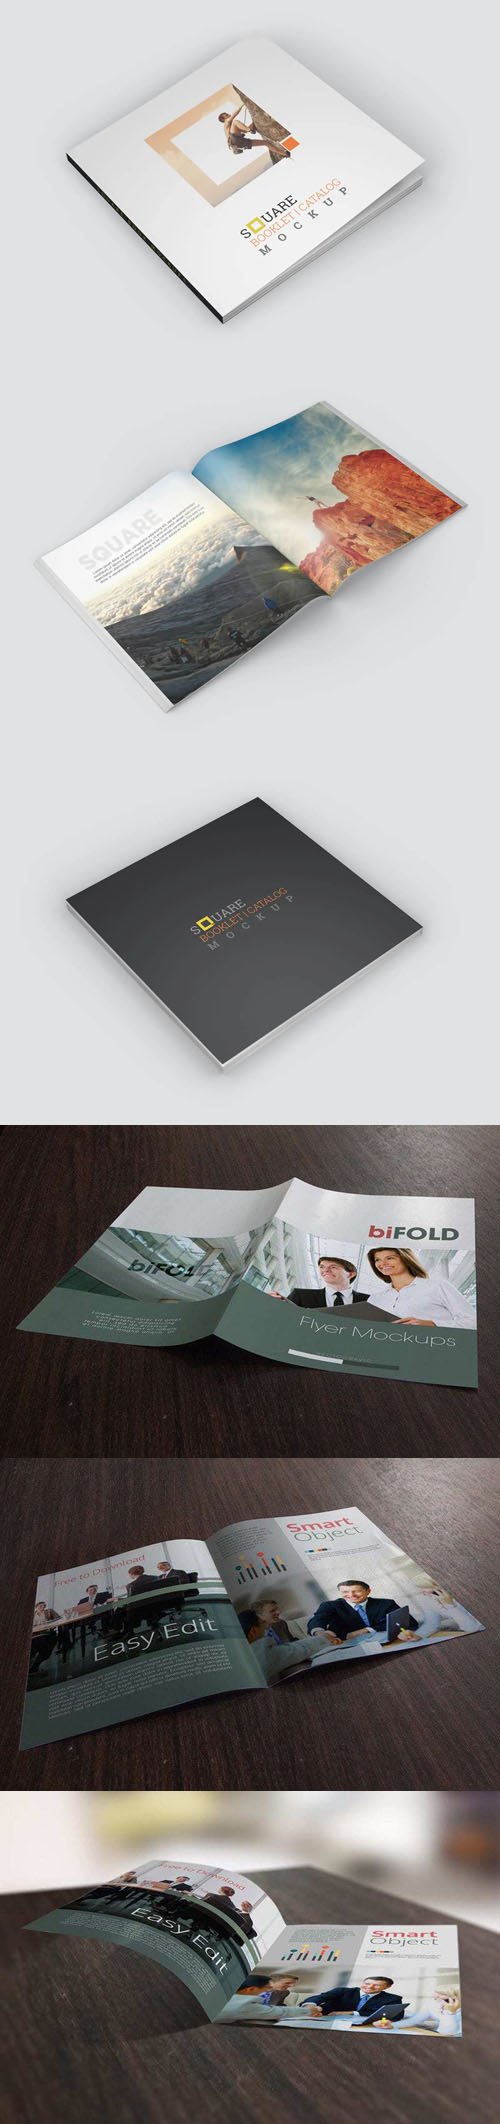 Square Book + Bifold Flyer PSD Mockups Templates